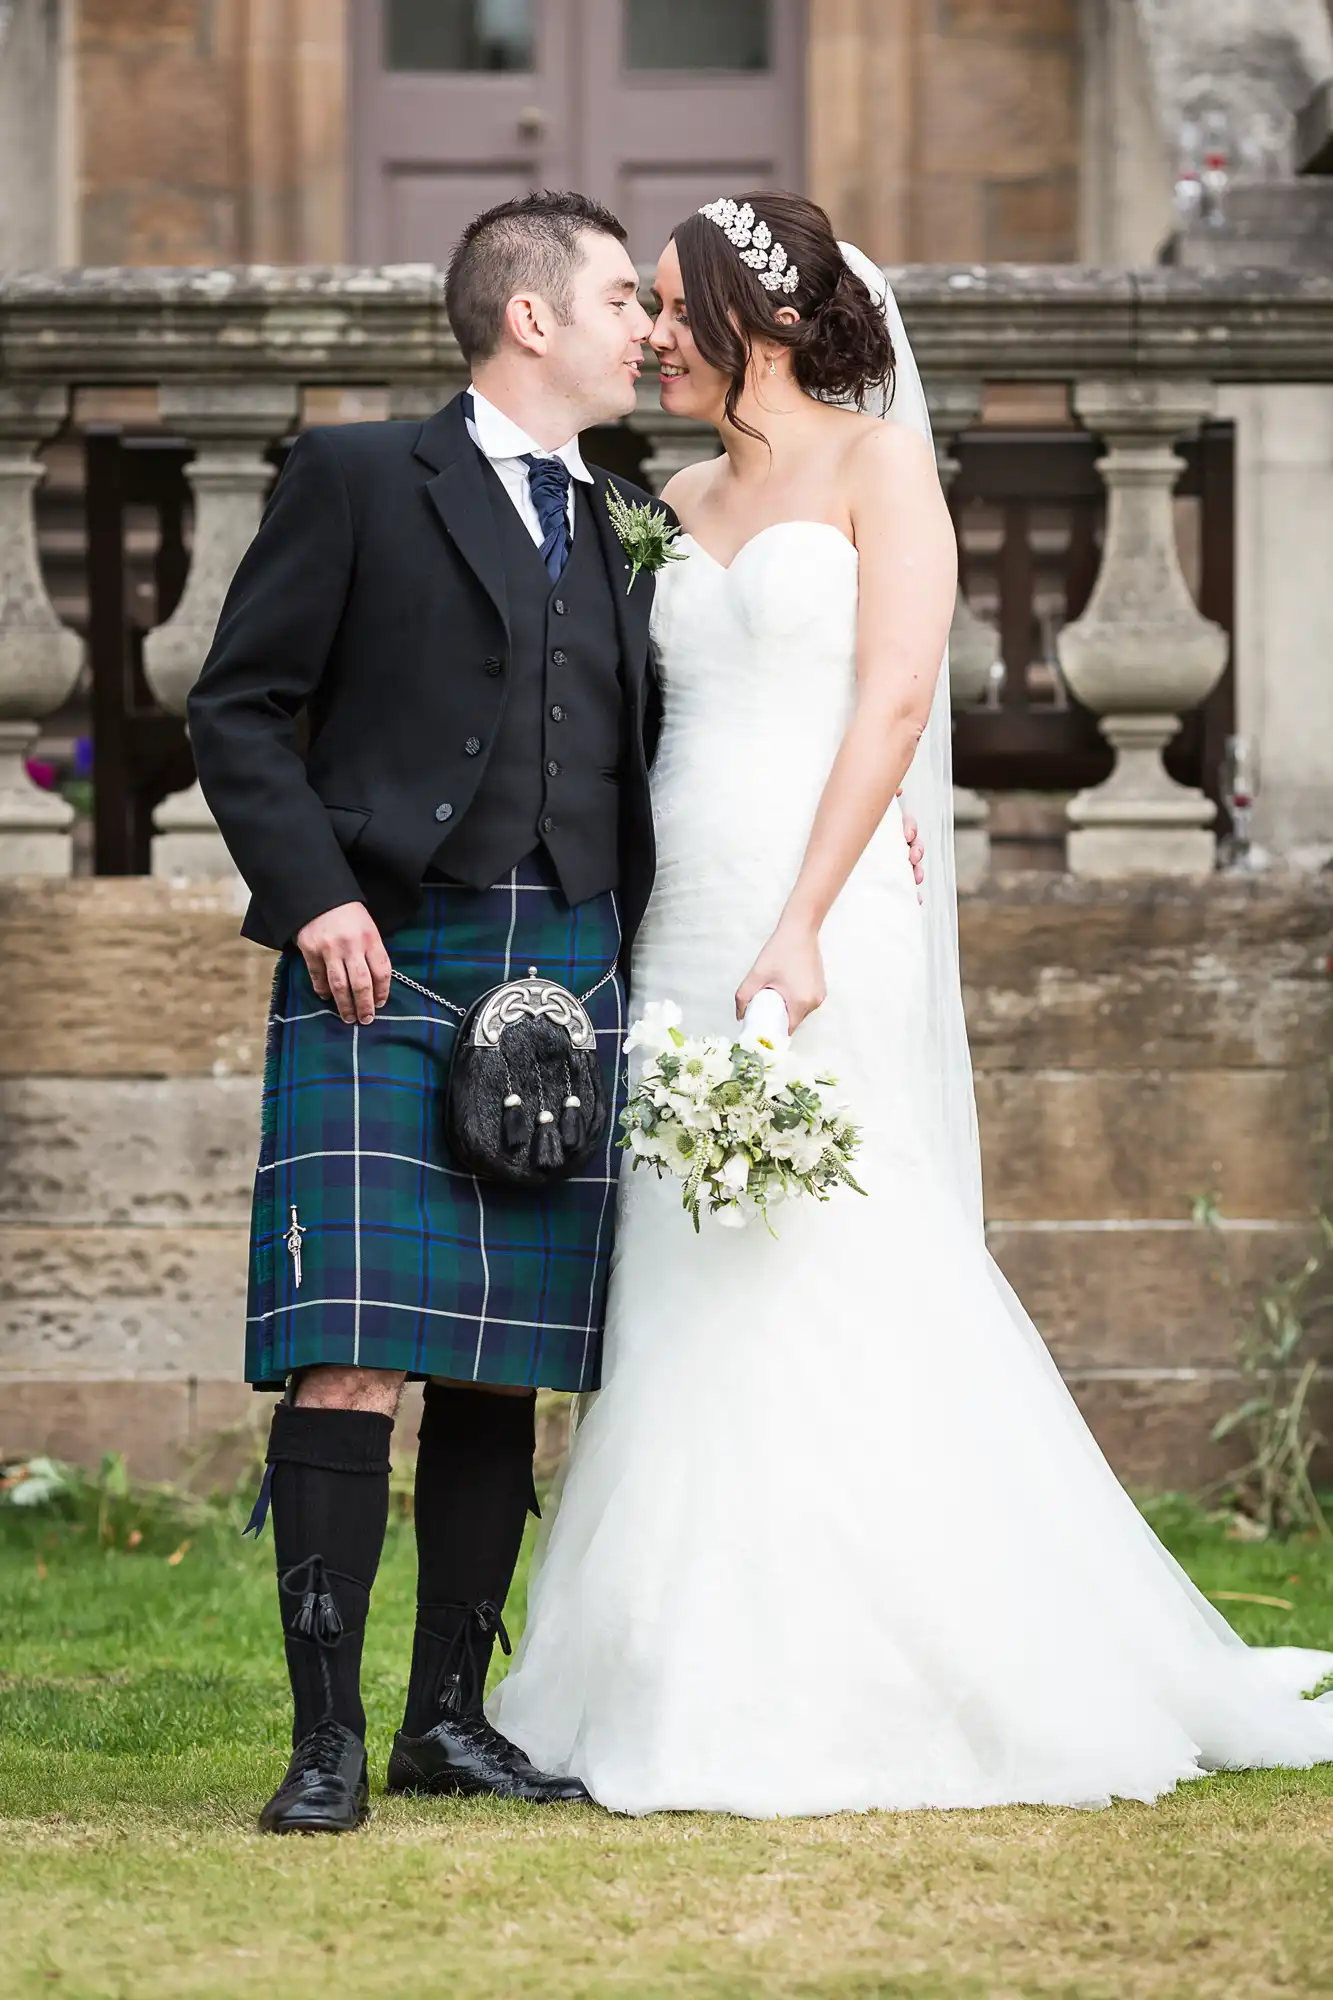 A bride in a white dress and a groom in a kilt embracing and smiling at each other in a garden.